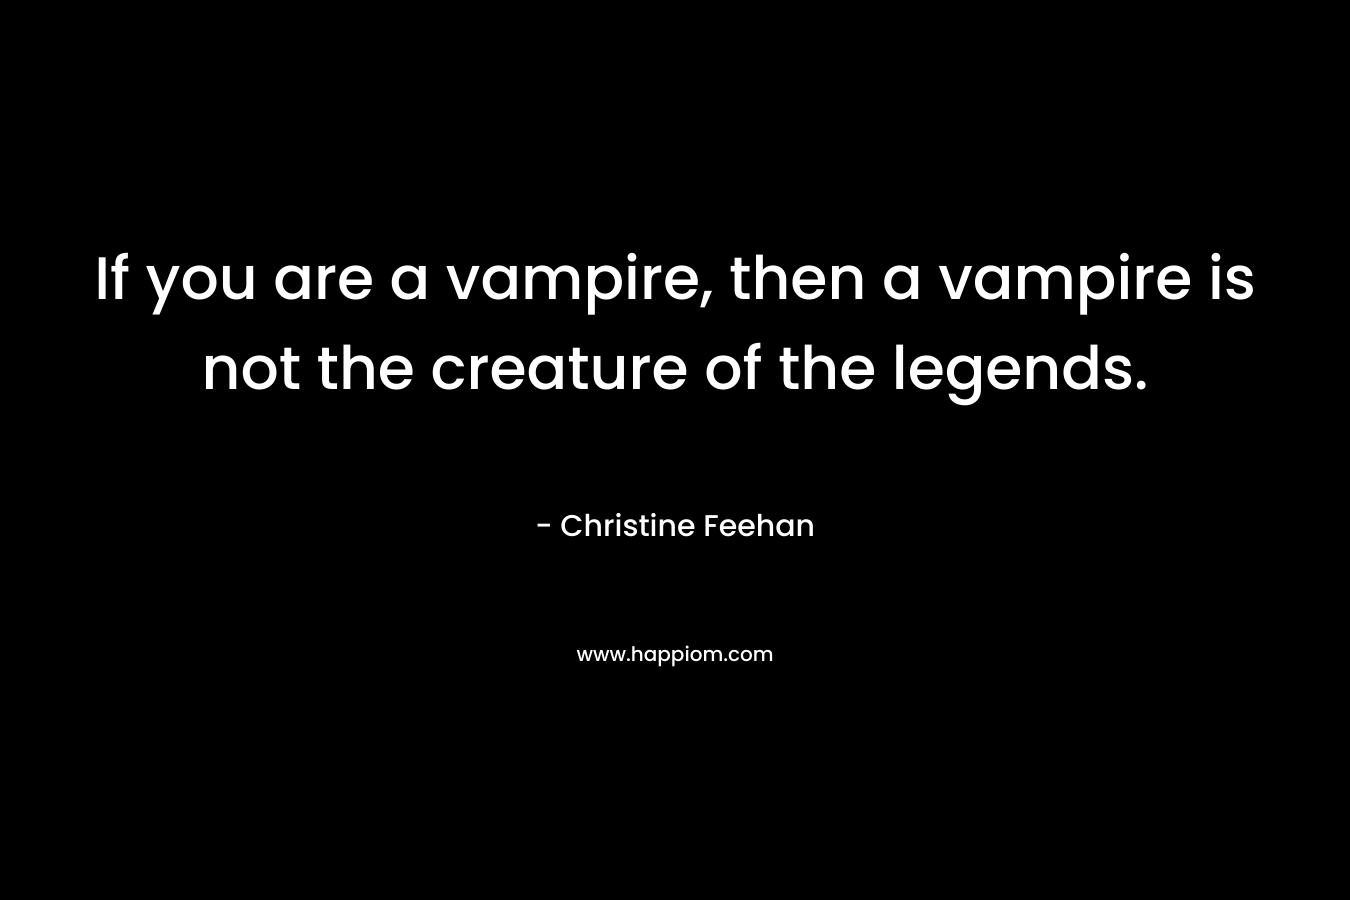 If you are a vampire, then a vampire is not the creature of the legends. – Christine Feehan